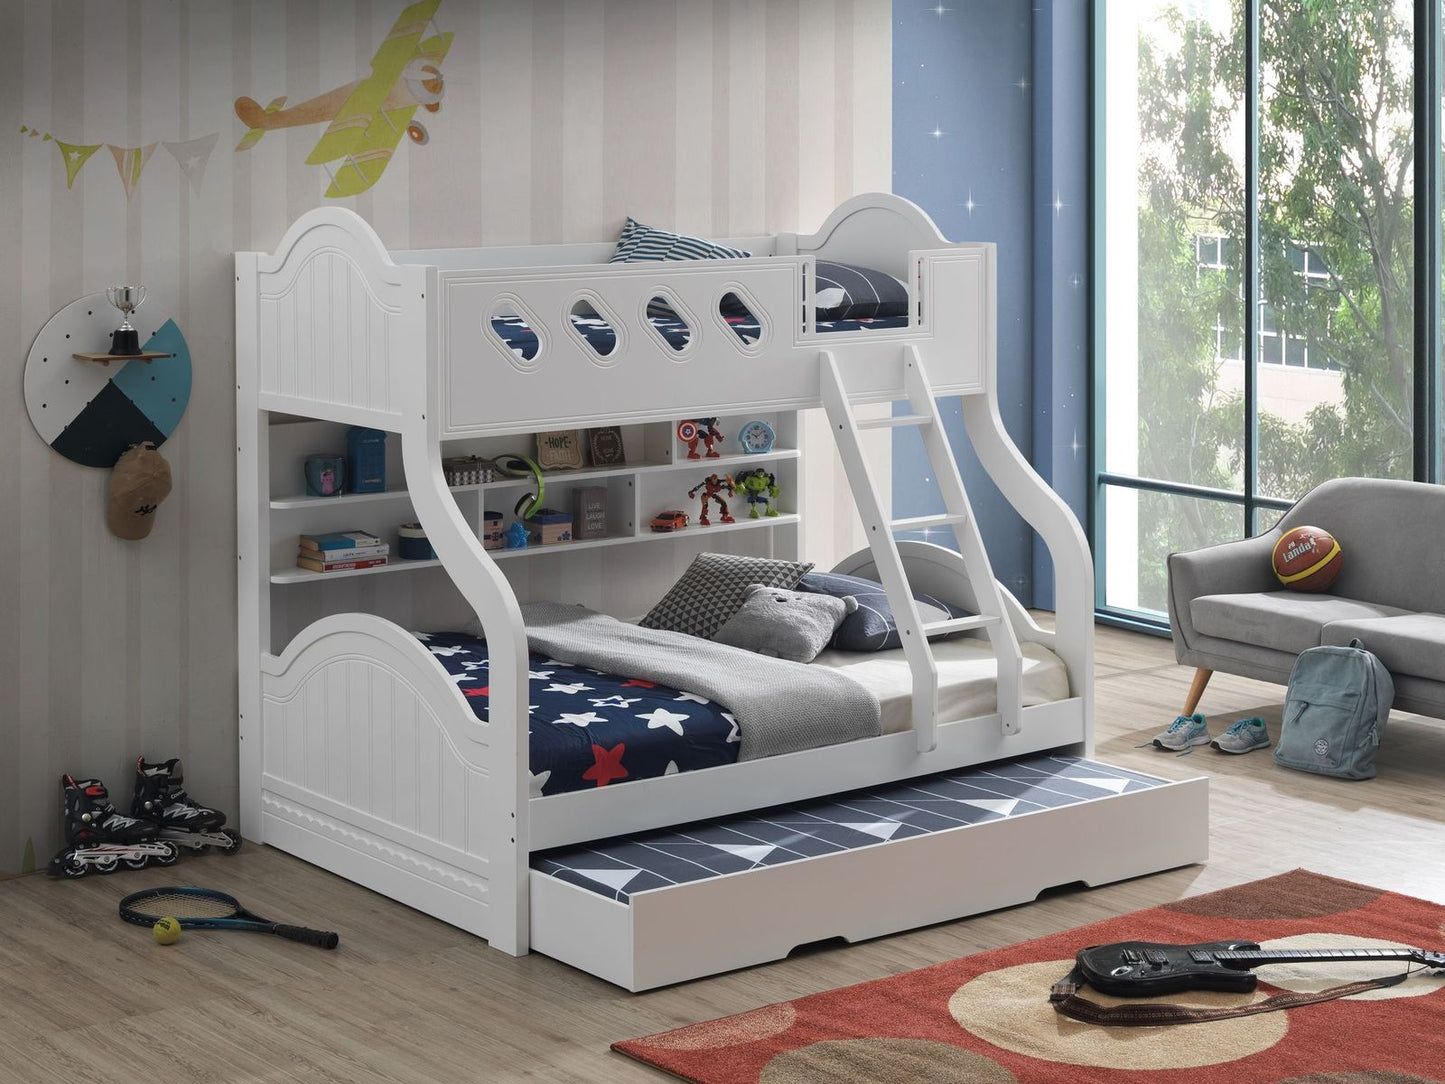 Grover Twin/Full Bunk Bed w/, White